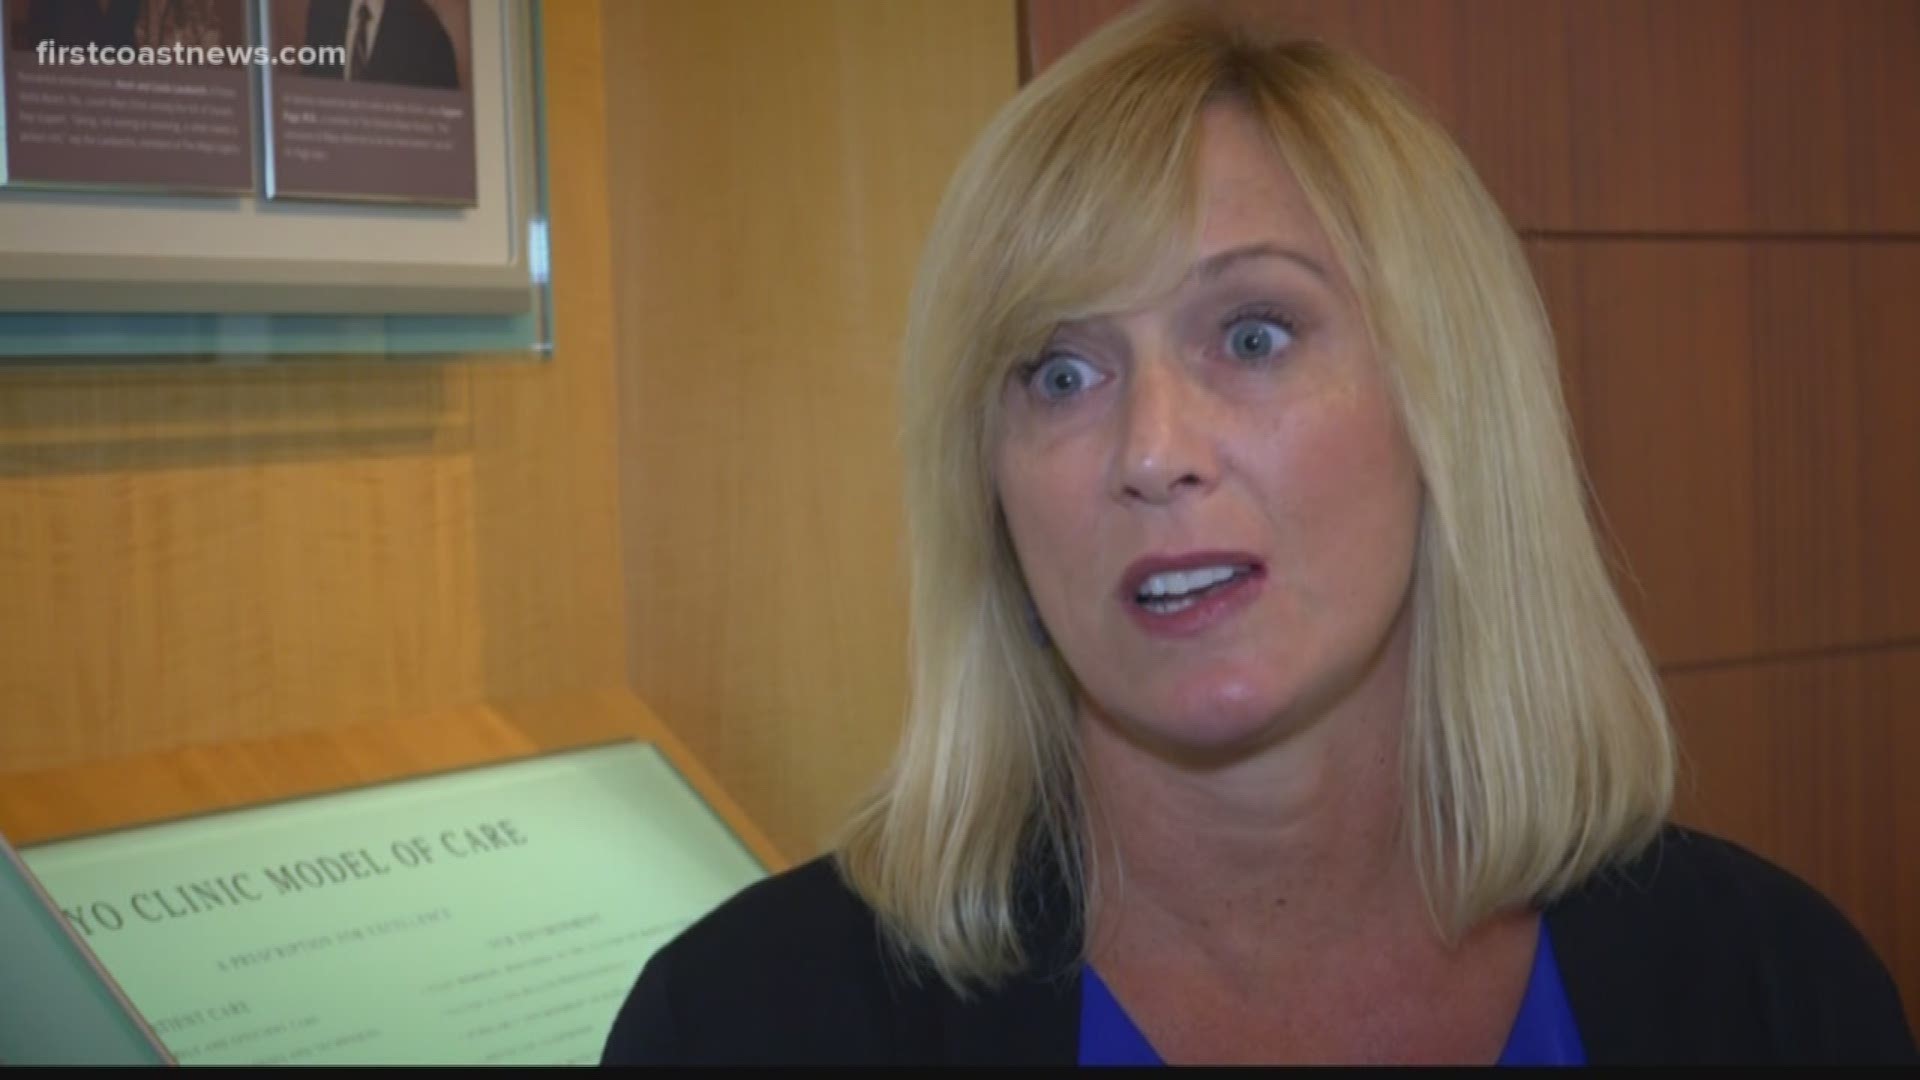 FCN's Juliette Dryer spoke with a woman whose life has been affected by a melanoma.